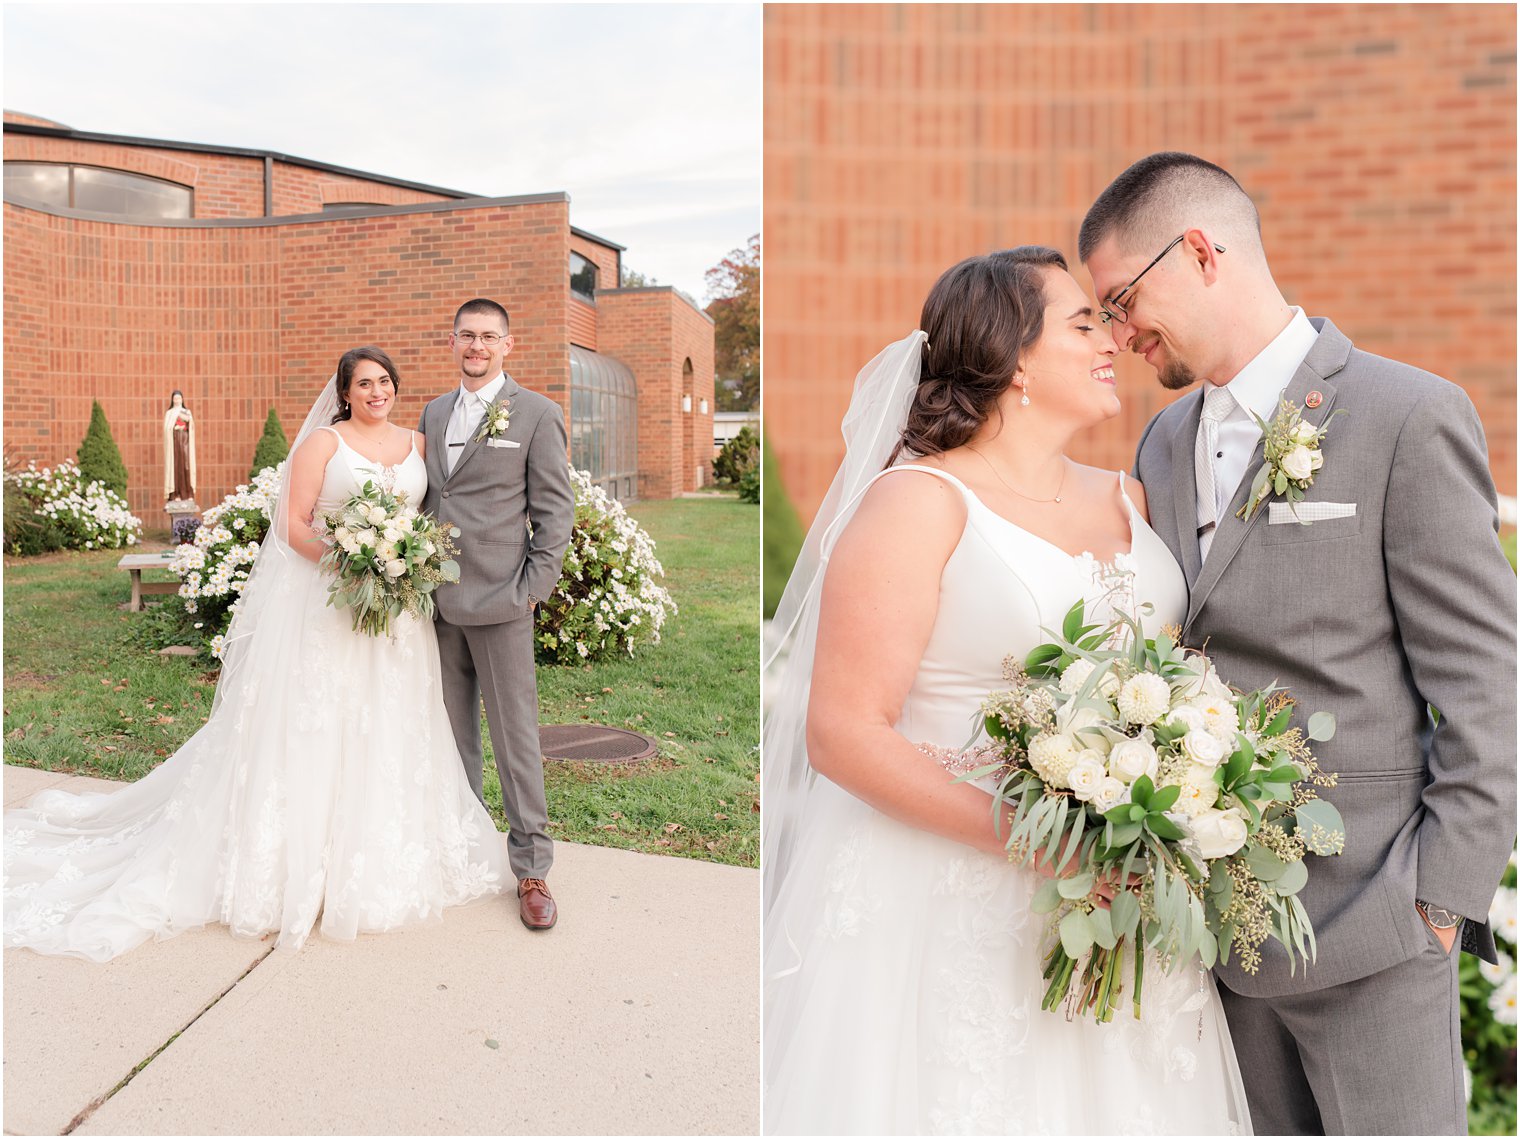 New Jersey wedding portraits of bride and groom on church lawn